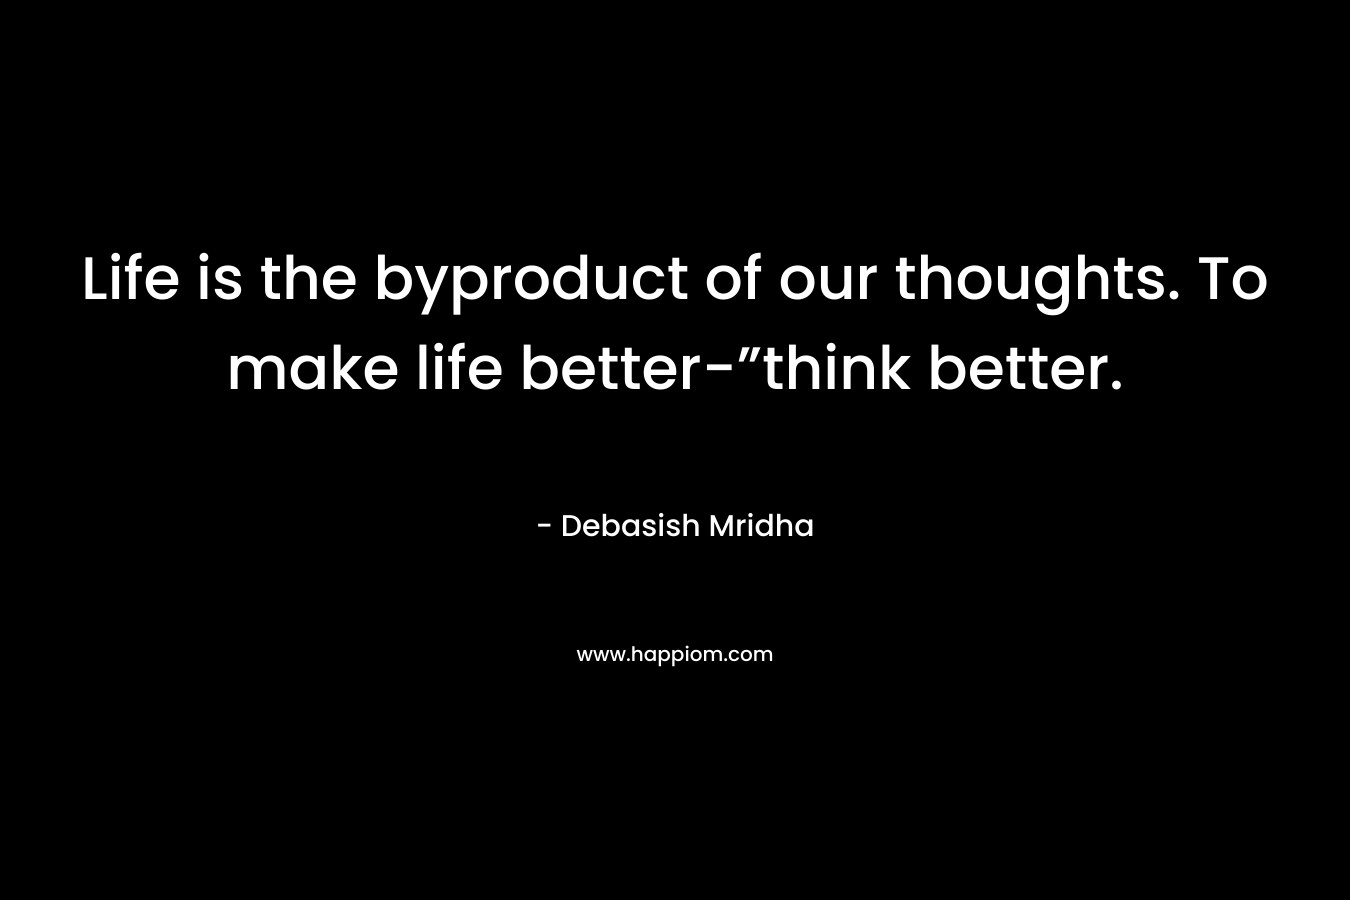 Life is the byproduct of our thoughts. To make life better-”think better.